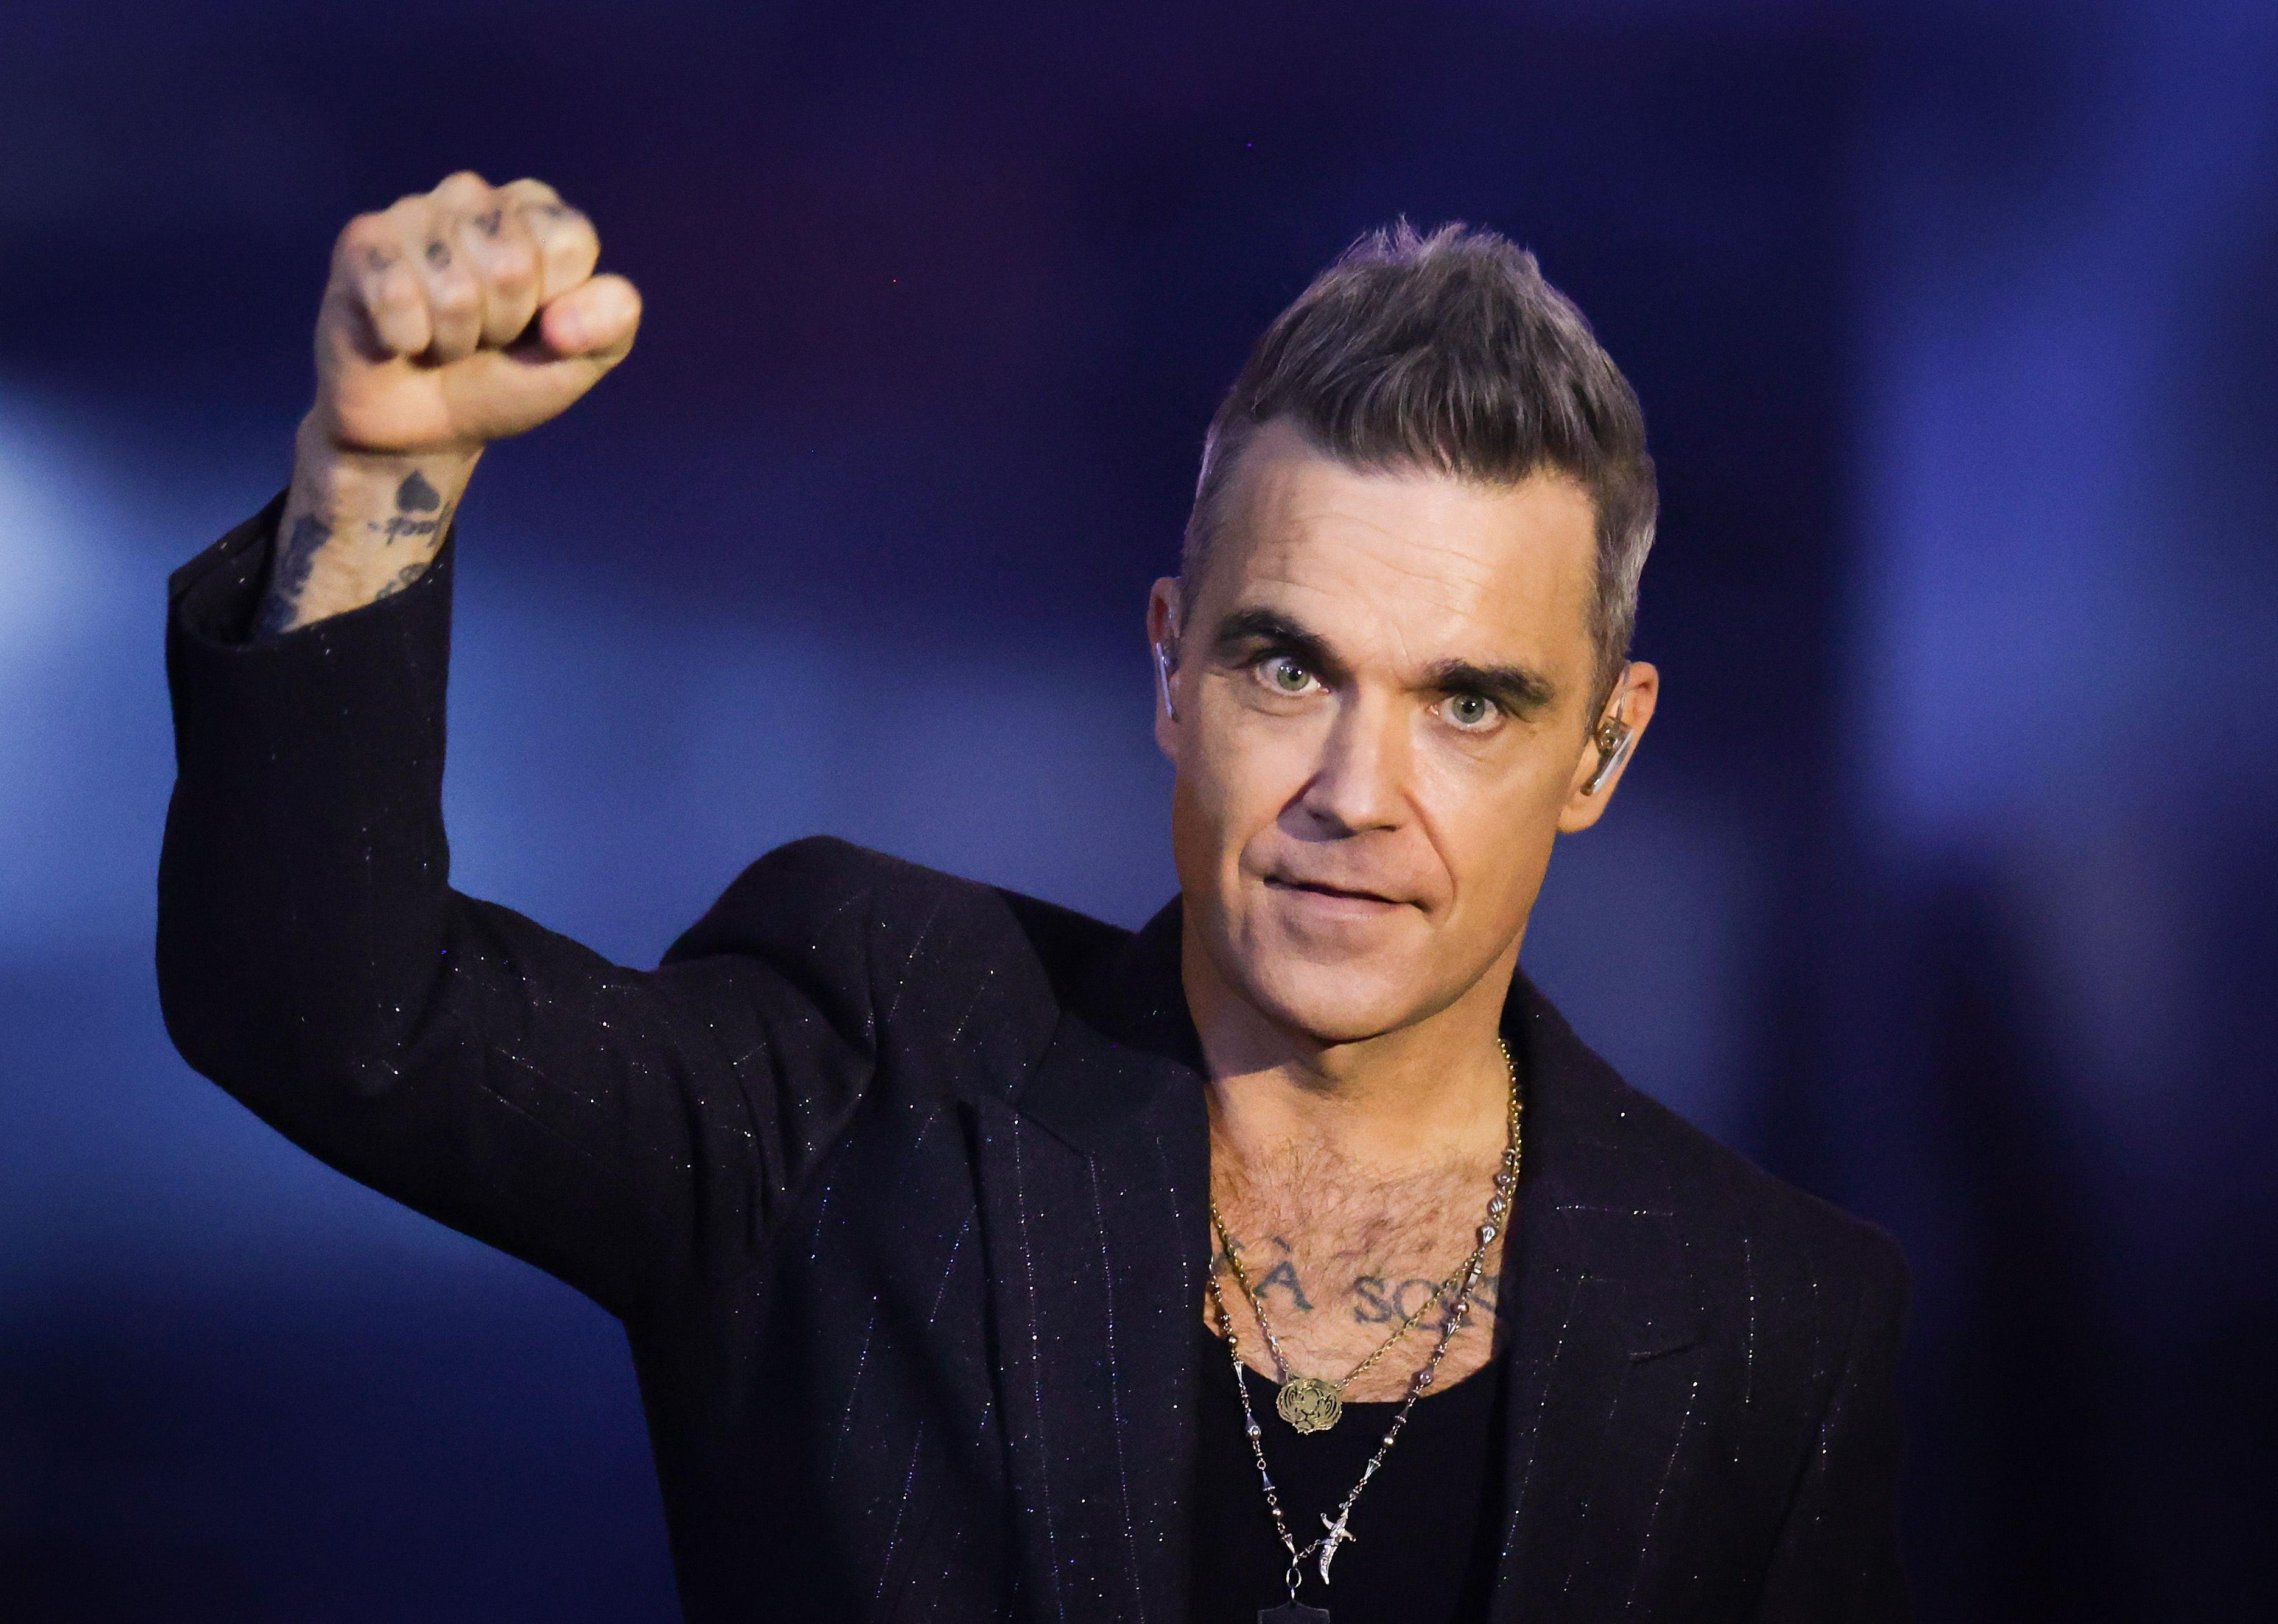 Robbie Williams performs on stage during the "Wetten, dass...?" Live Show.